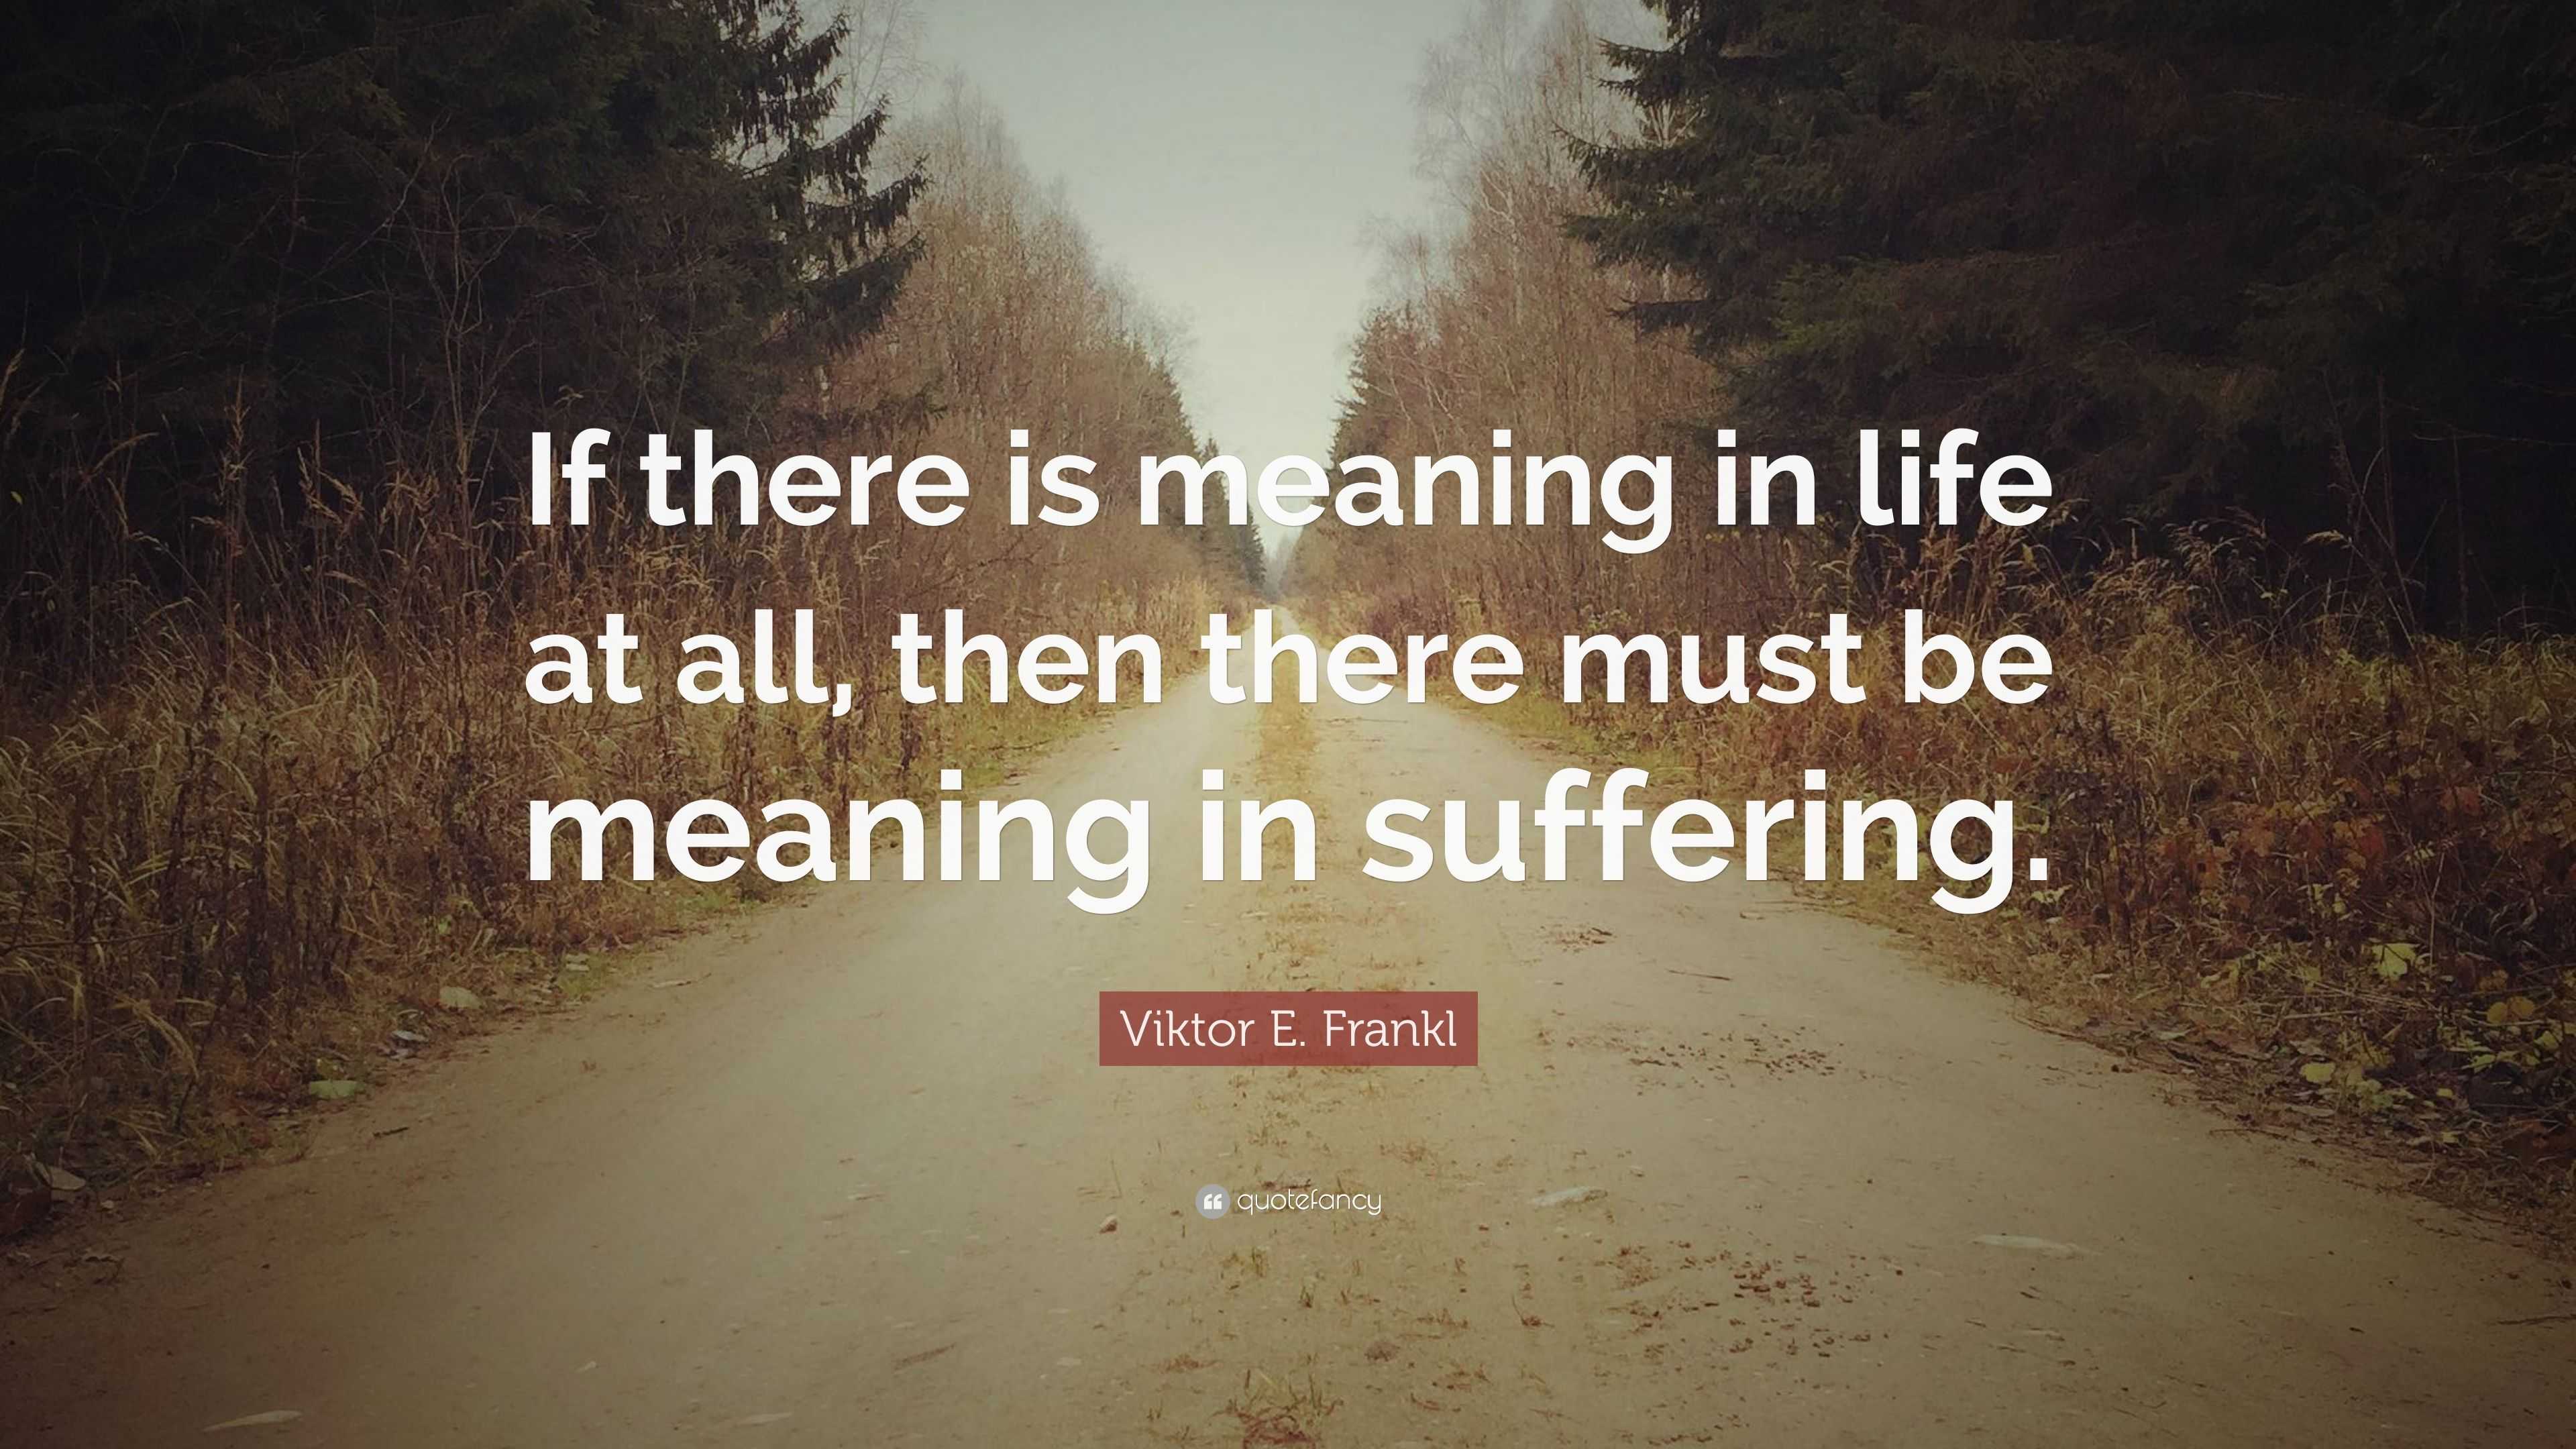 Viktor E Frankl Quote “If there is meaning in life at all